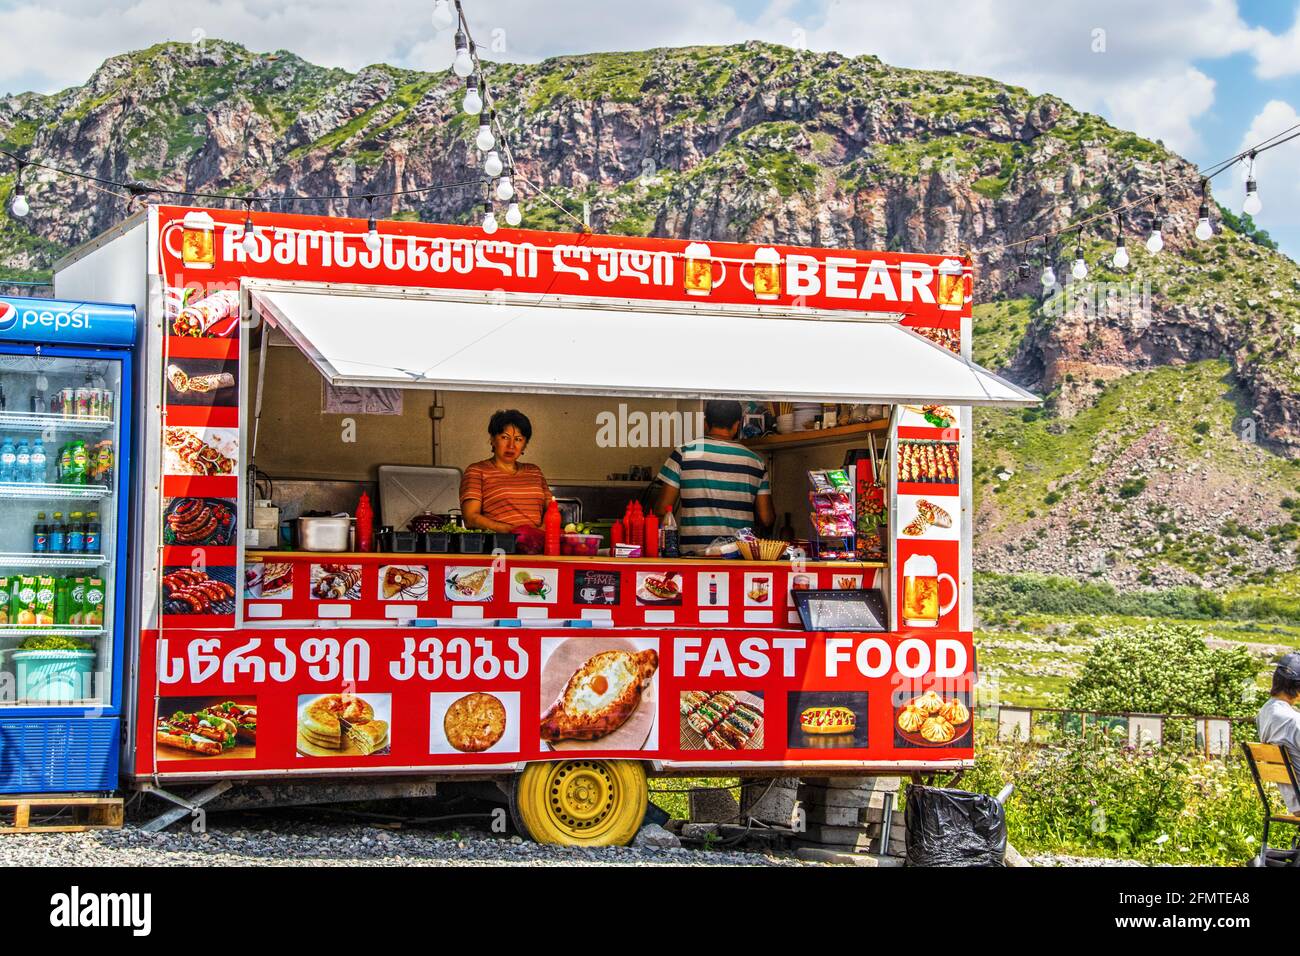 07 01 2019 Stepantminda Georgia - Street food vendor with two servers inside and lights strung up outside advertising traditional Georgian food and pi Stock Photo